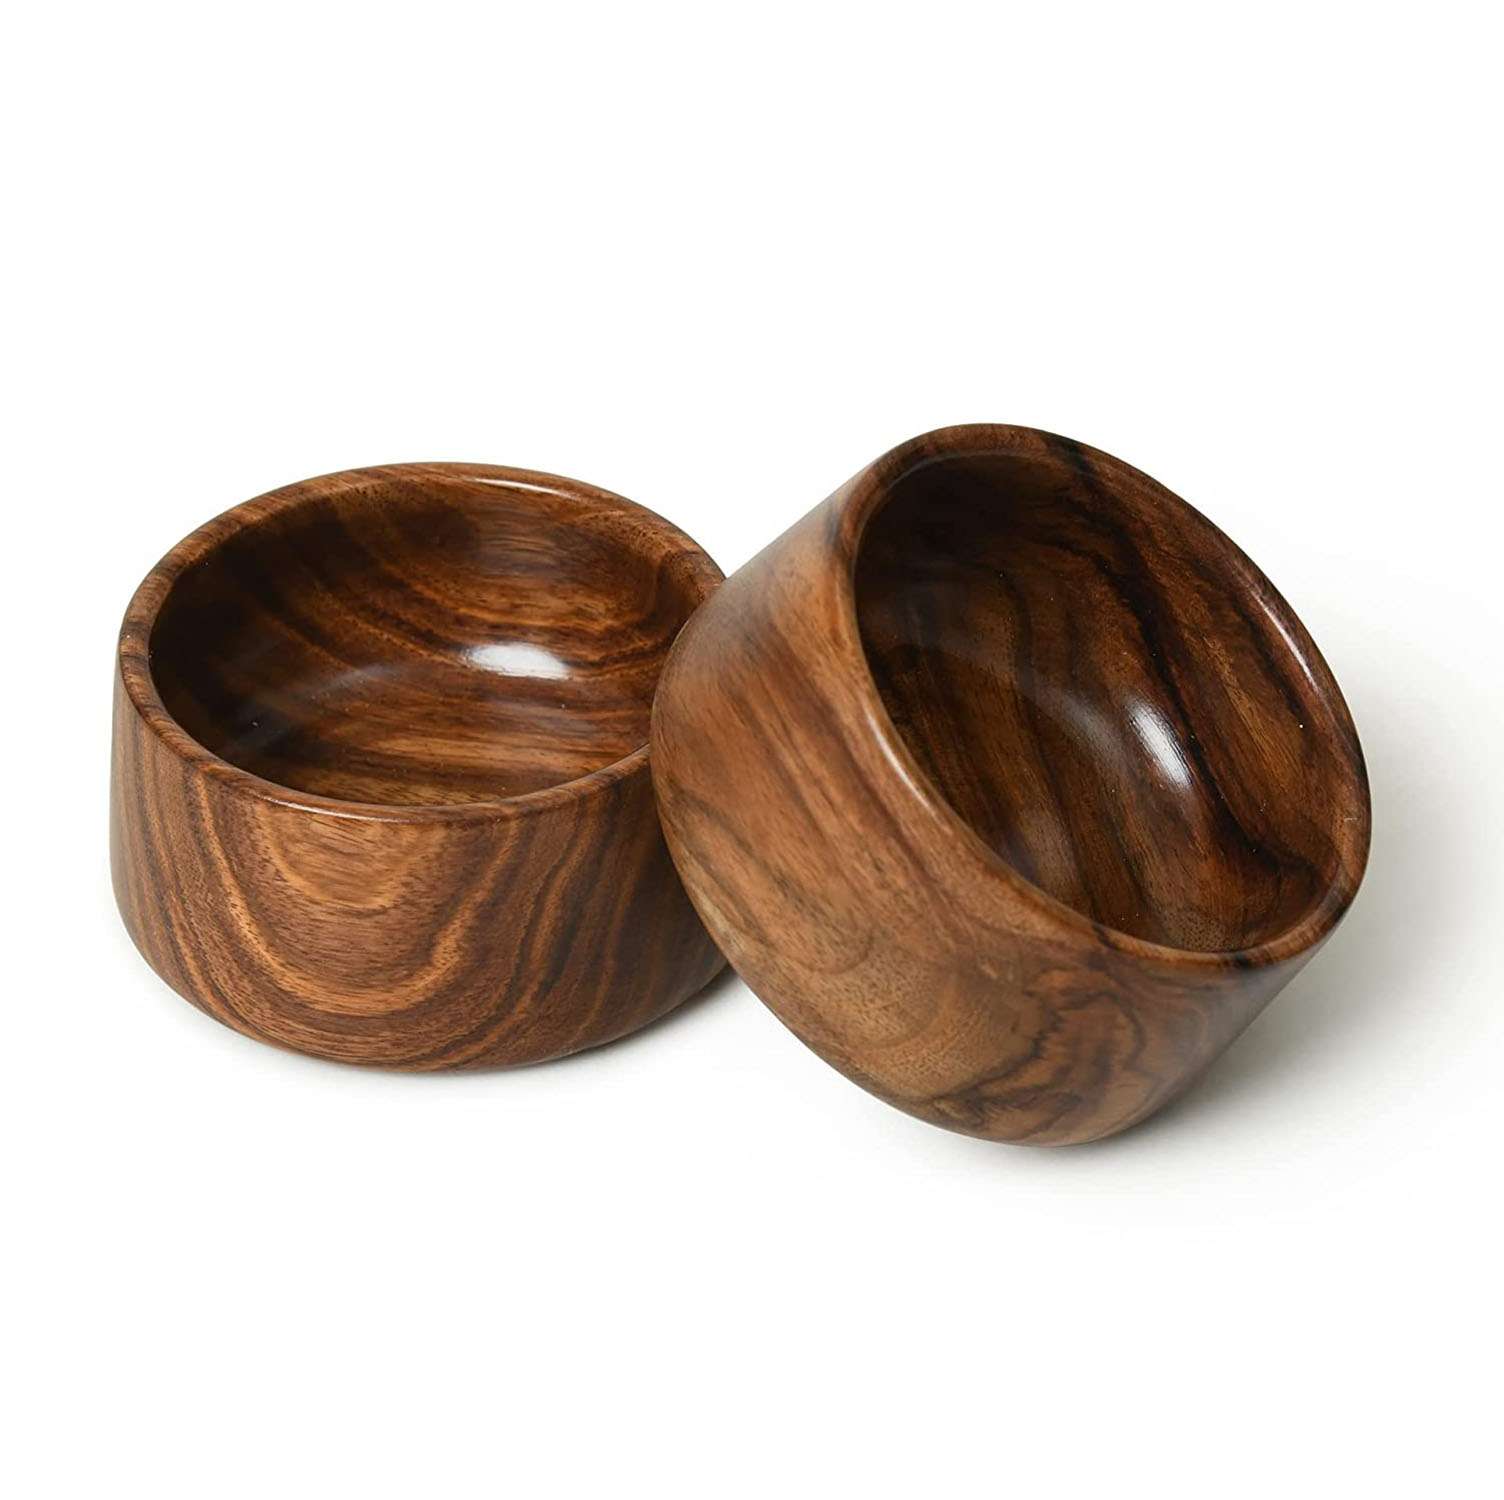 Solid Wood Round Shape Serving Bowls | wholesale wooden bowls